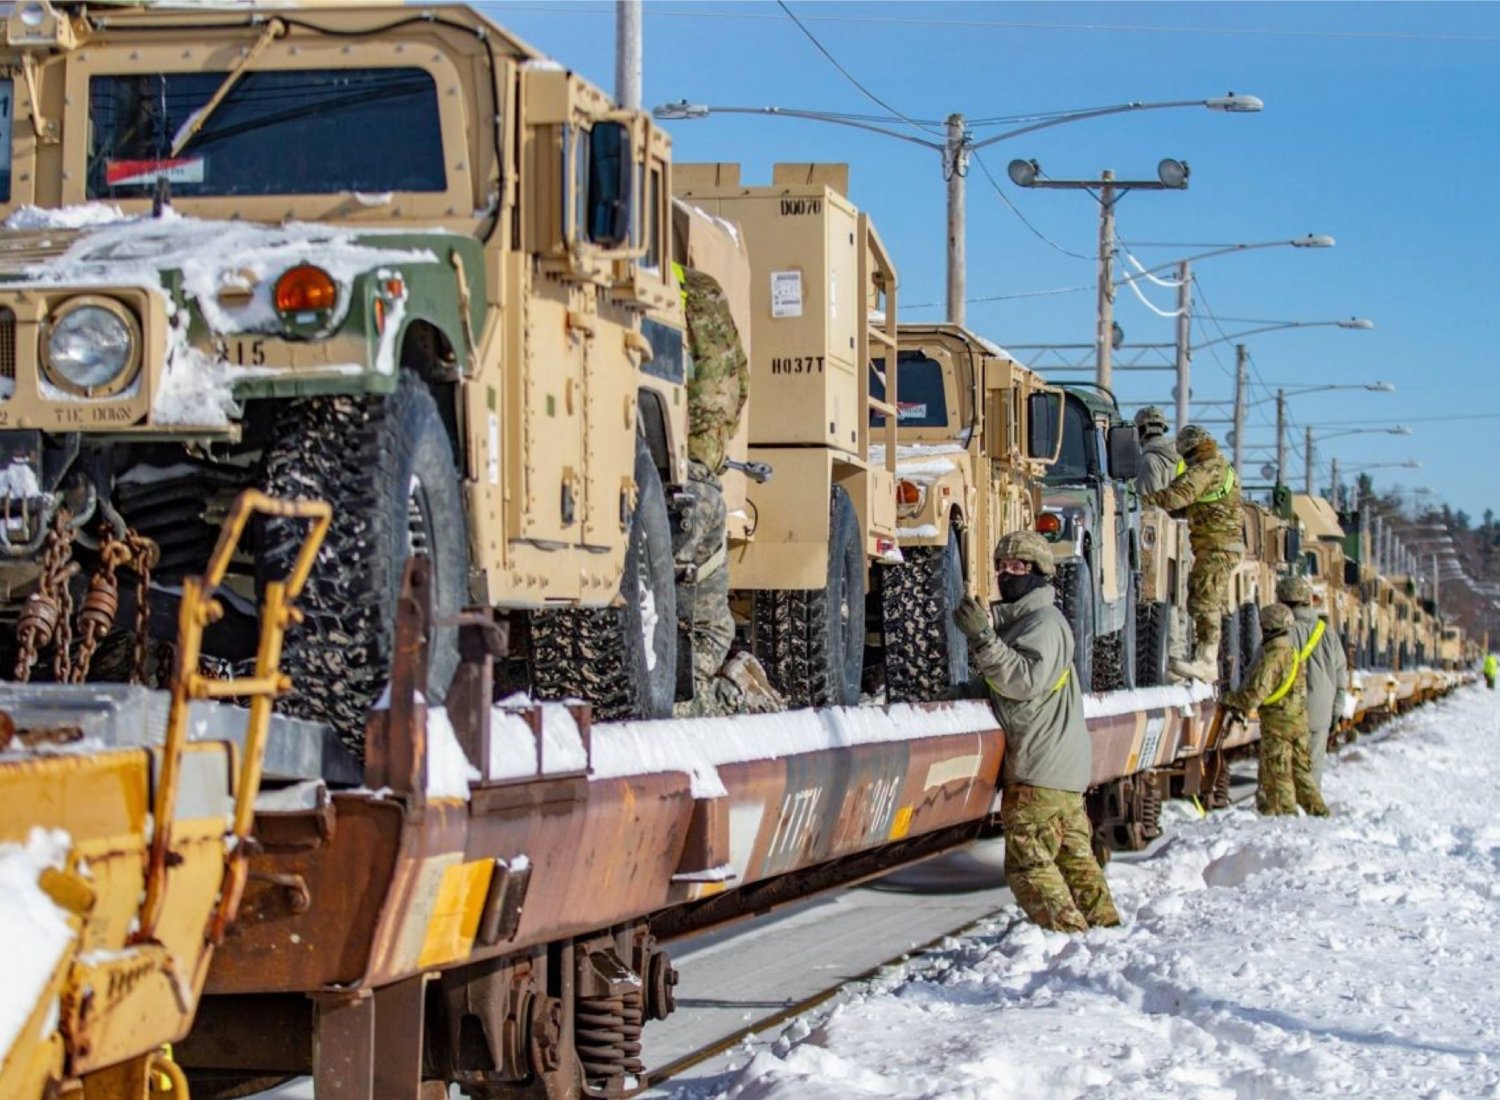 BIG IMPACT — Soldiers with the 10th Mountain Division at Fort Drum in Watertown secure vehicles on a flatbed train car in this file photo included in Fort Drum’s 2021 economic impact report.  According to the report, Fort Drum had an economic impact of more than $1.5 billion on the North Country.